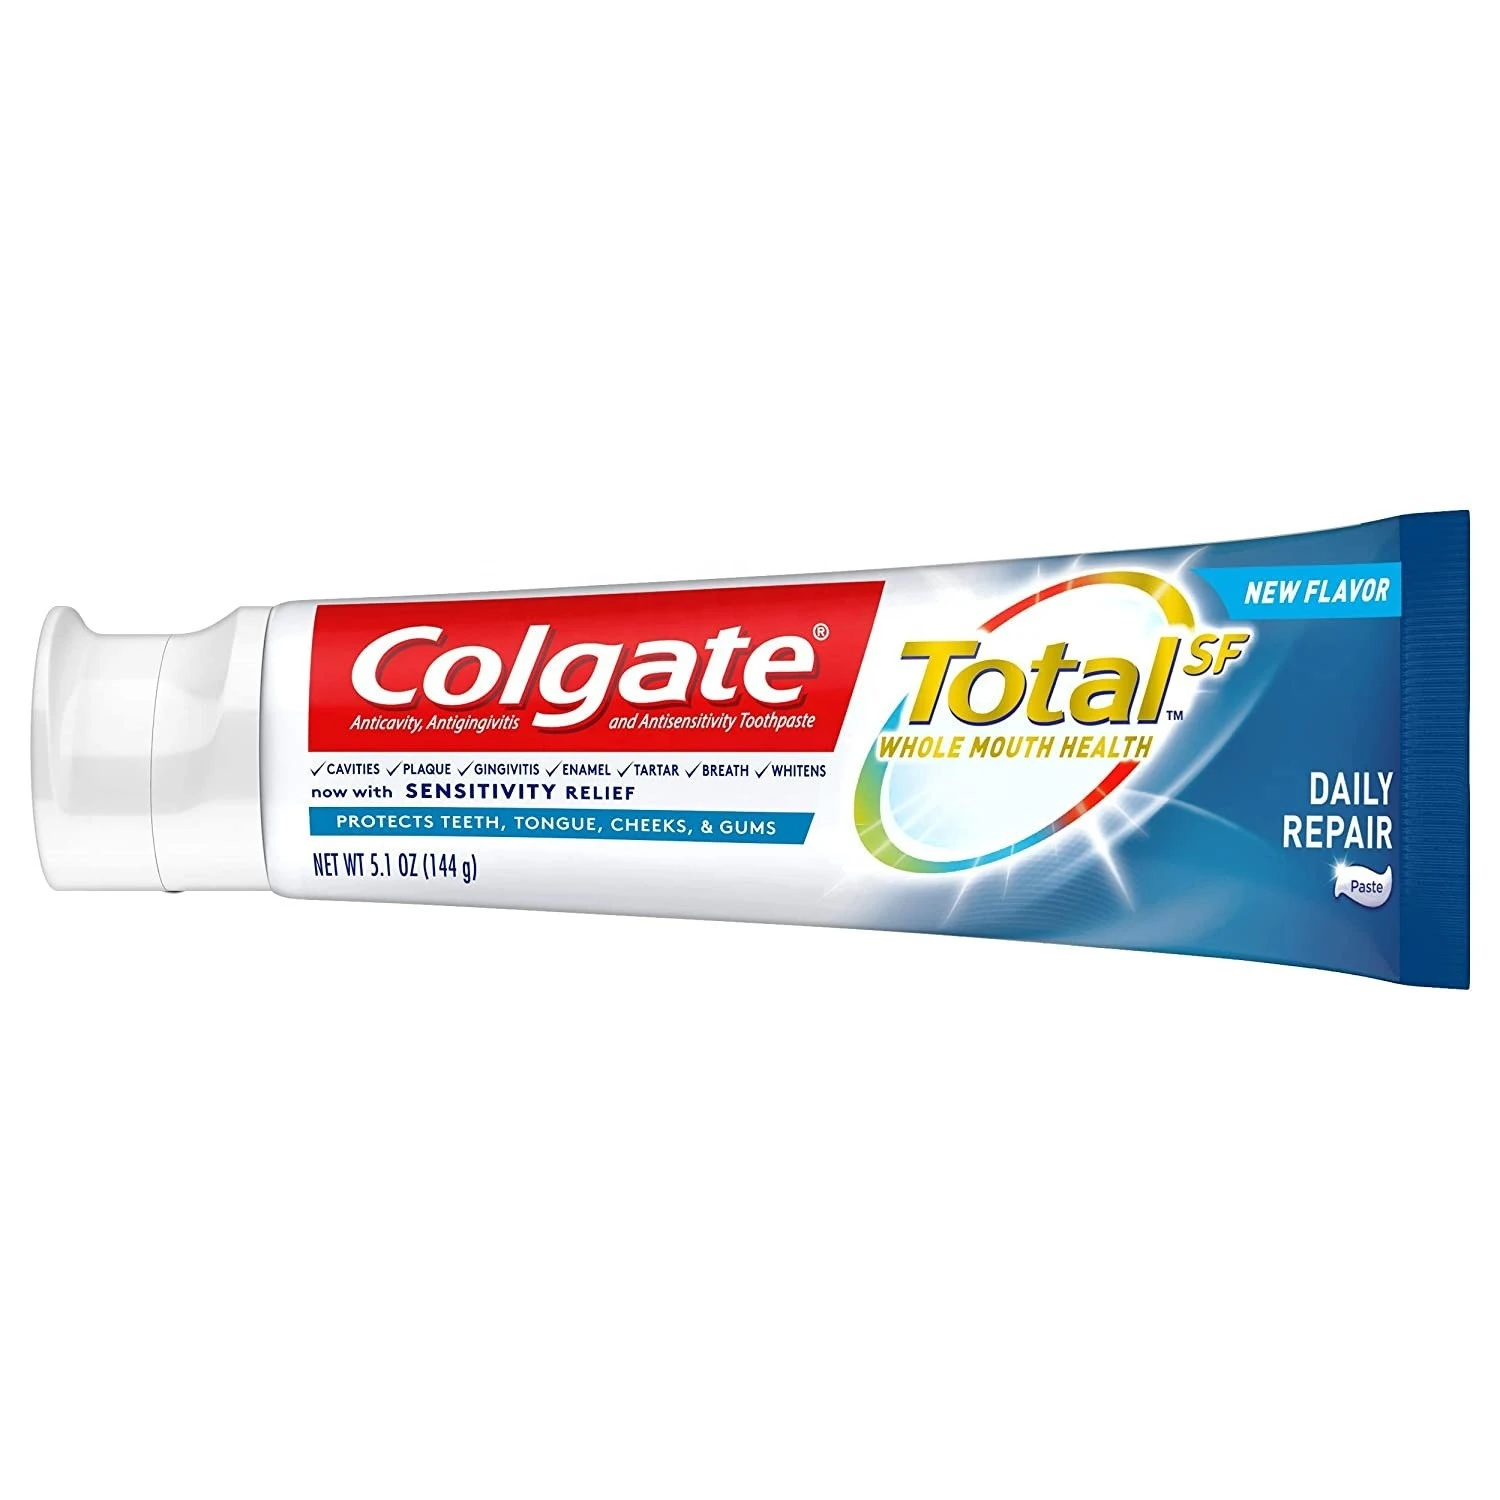 Colgate Total Toothpaste, Daily Repair , whitening toothpaste